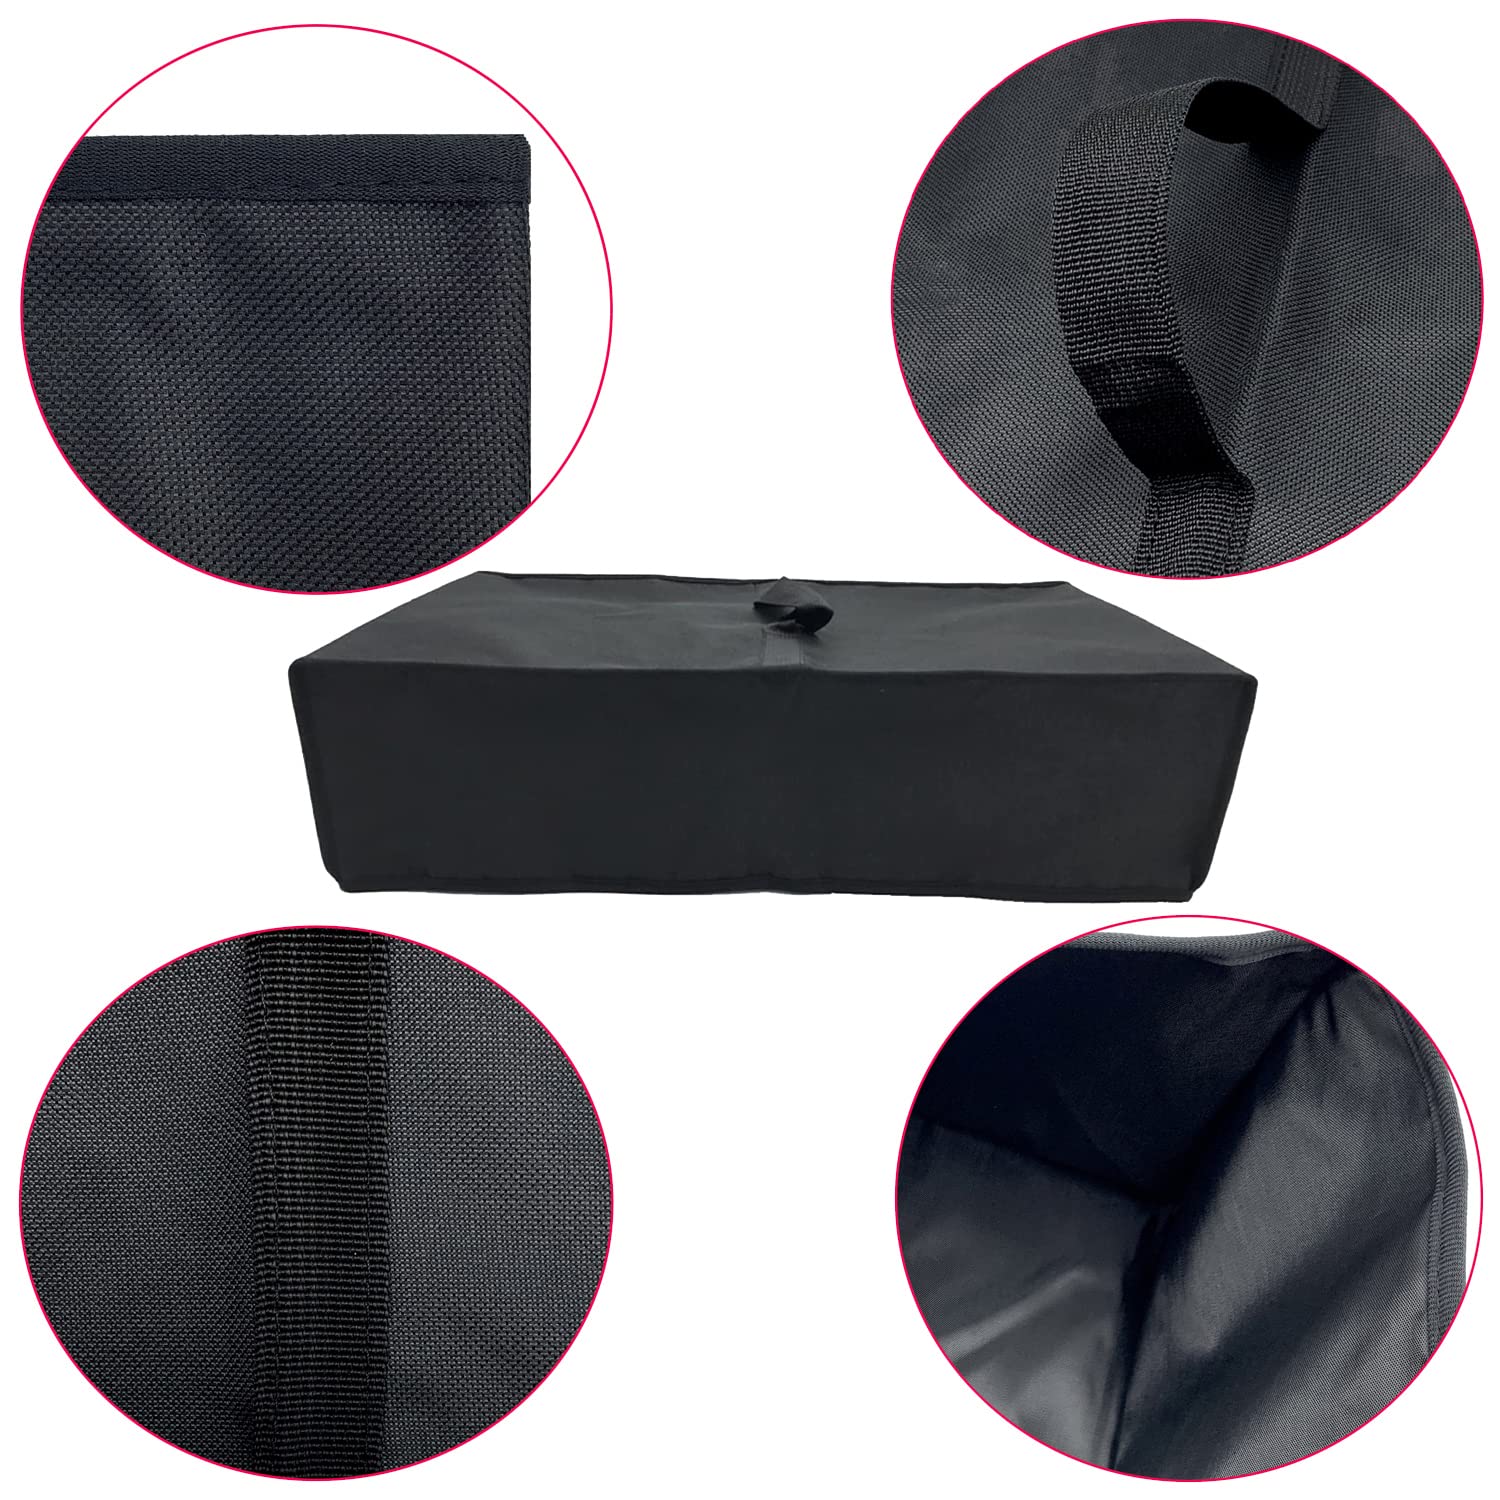 Wanty Black Antistatic Water-Proof Dust-Proof Nylon Fabric Printer Cover Case Protector for Bose Wave Music System IV